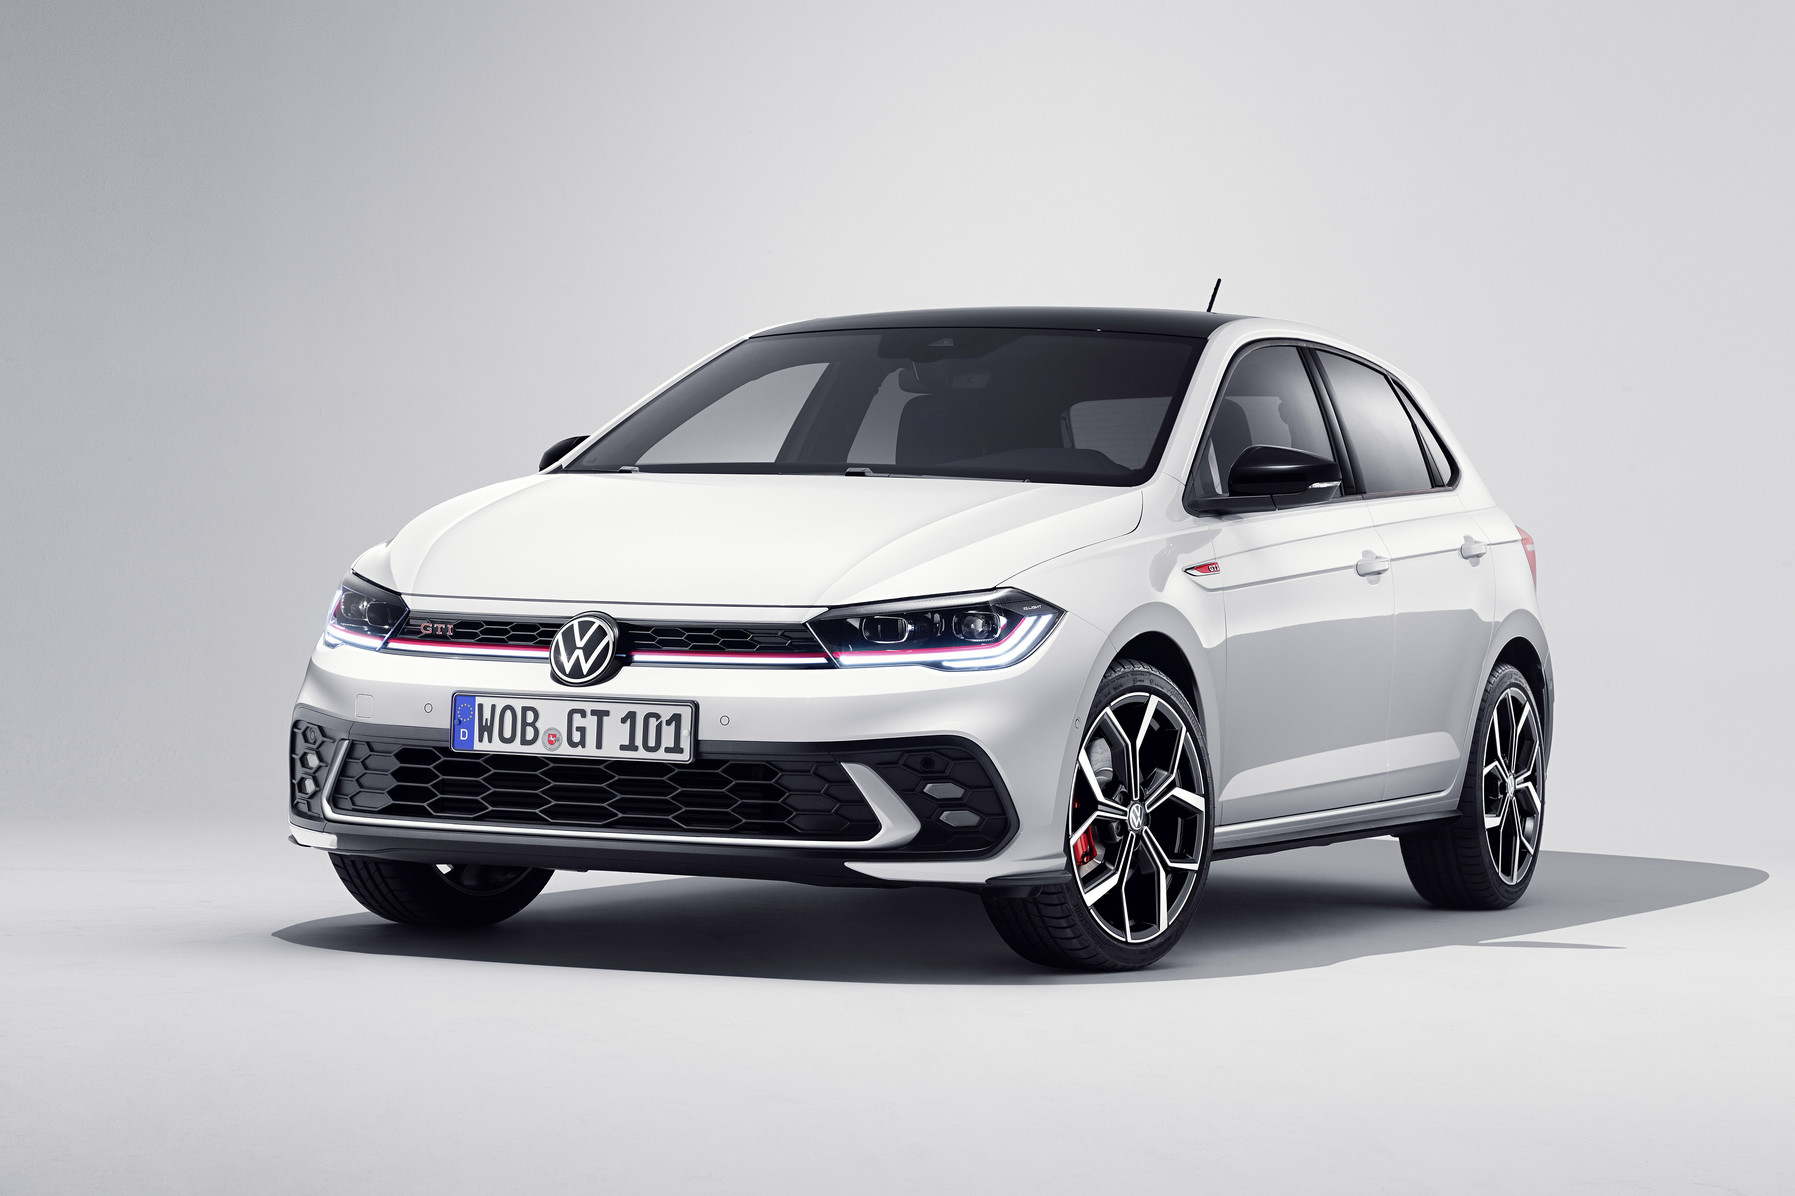 The new Polo GTI